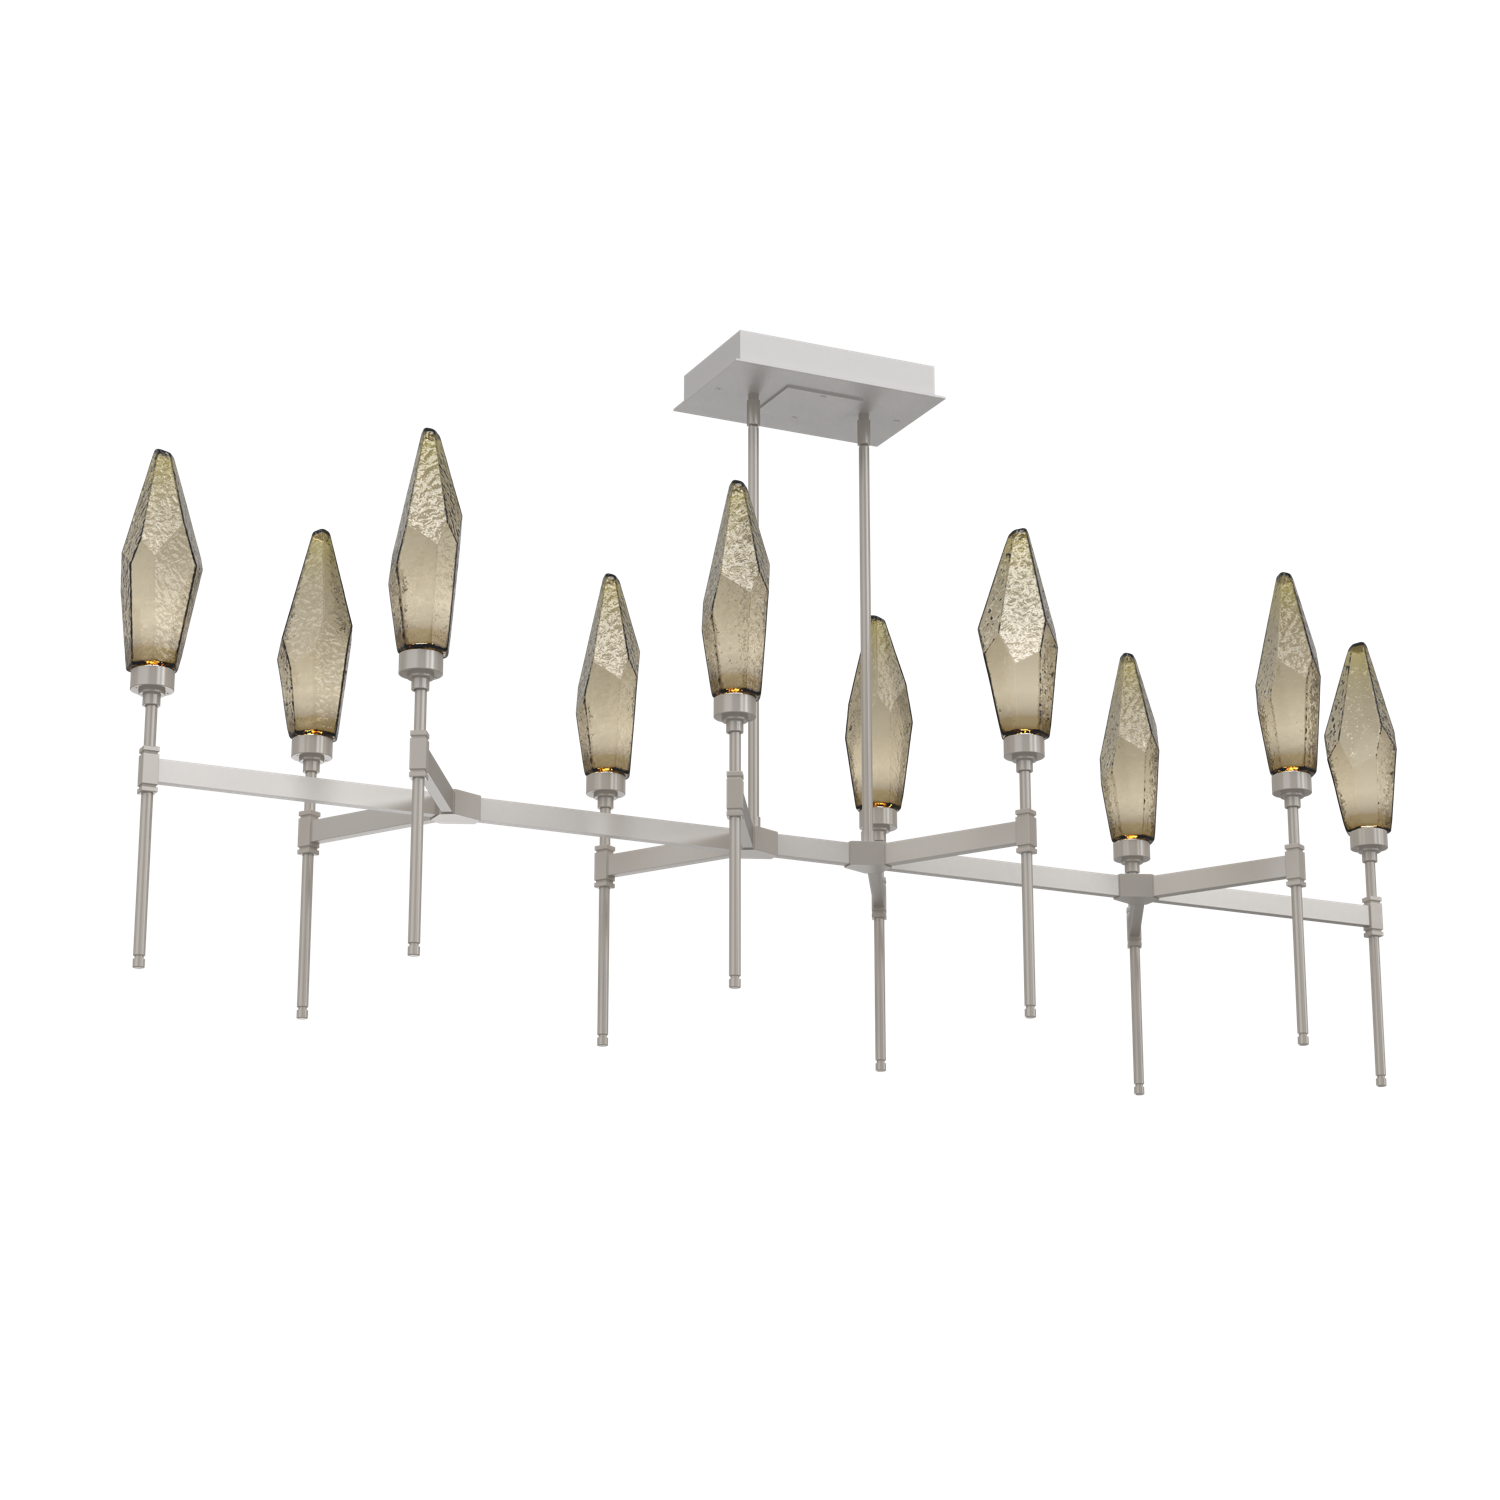 PLB0050-67-BS-CB-Hammerton-Studio-Rock-Crystal-67-inch-linear-belvedere-chandelier-with-beige-silver-finish-and-chilled-bronze-blown-glass-shades-and-LED-lamping